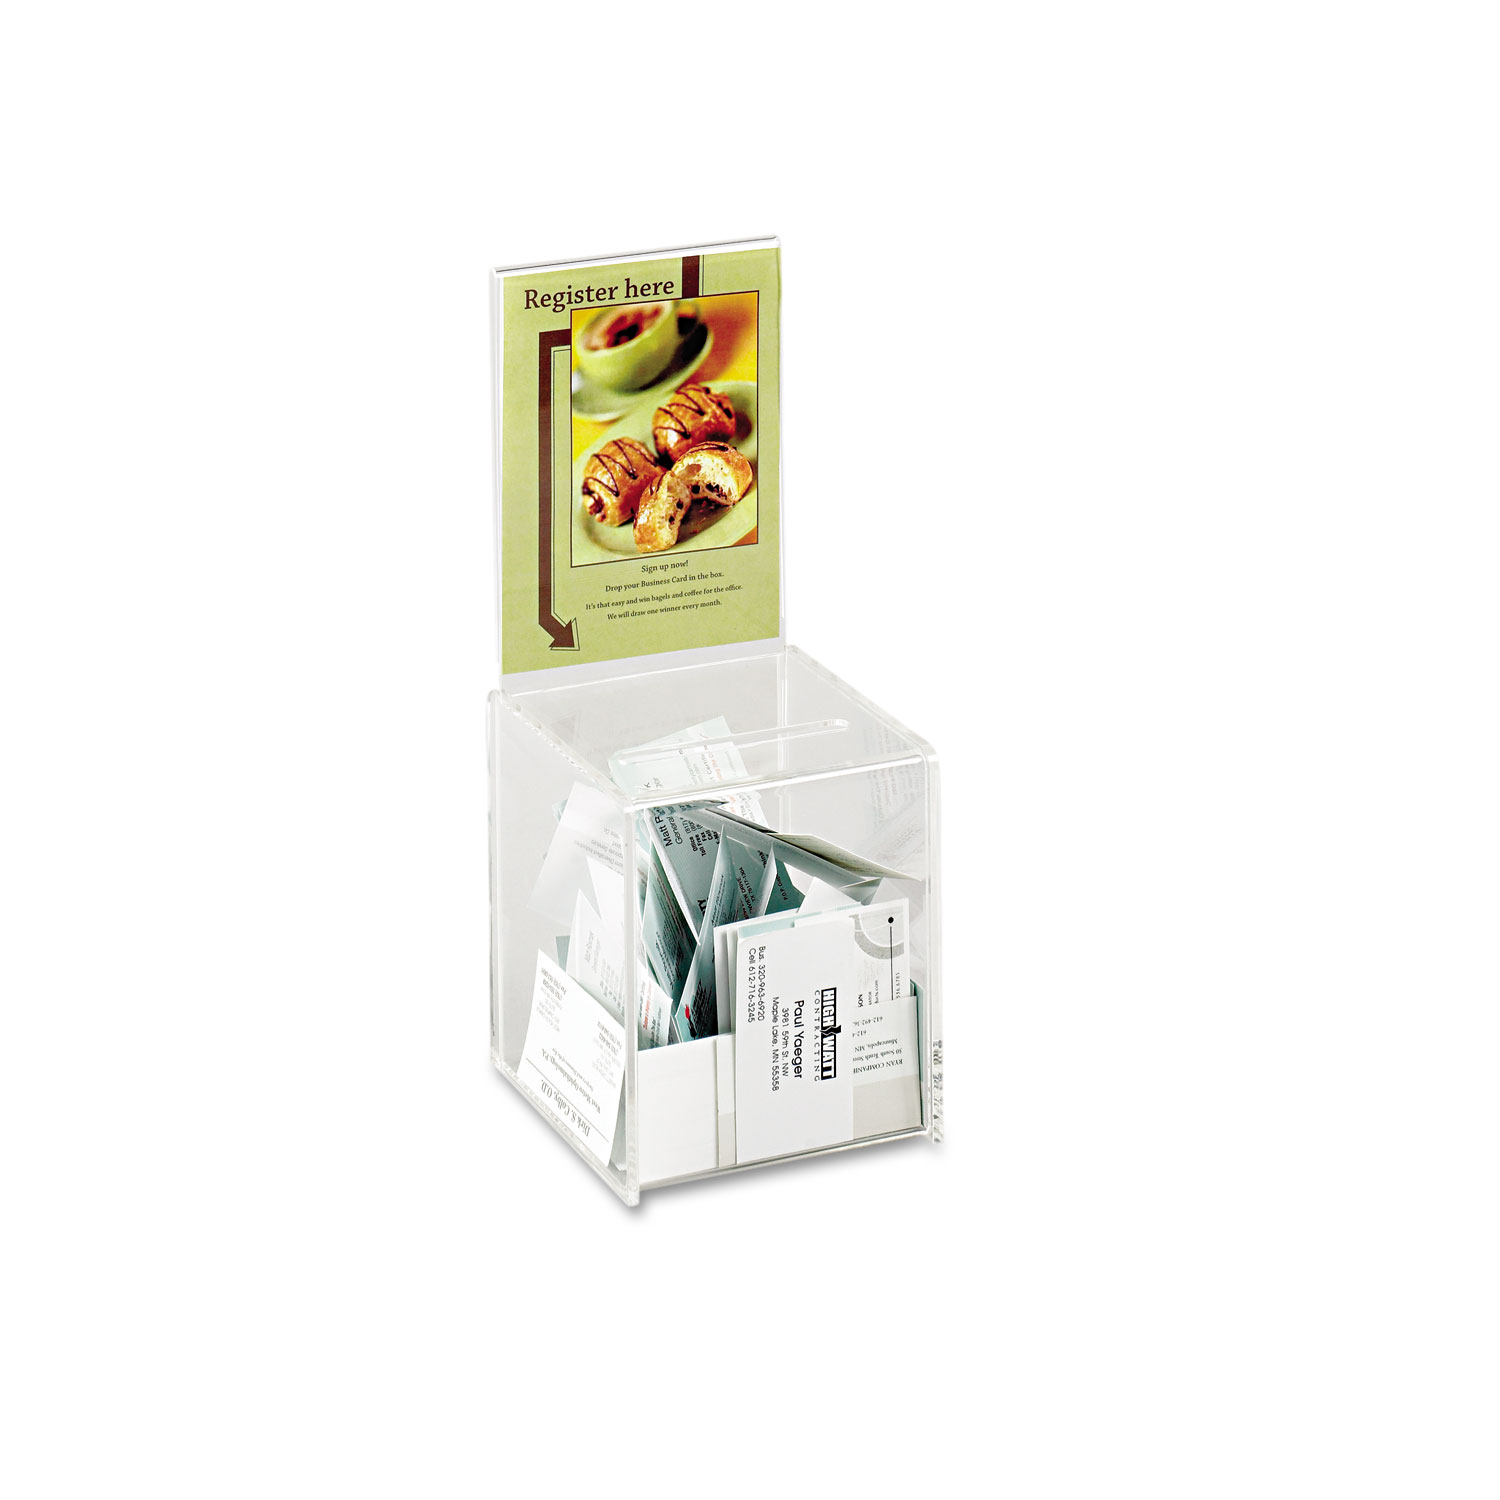  Safco 4235CL Small Acrylic Collection Box, 5 1/2 x 5 1/2 x 13, Clear (SAF4235CL) 